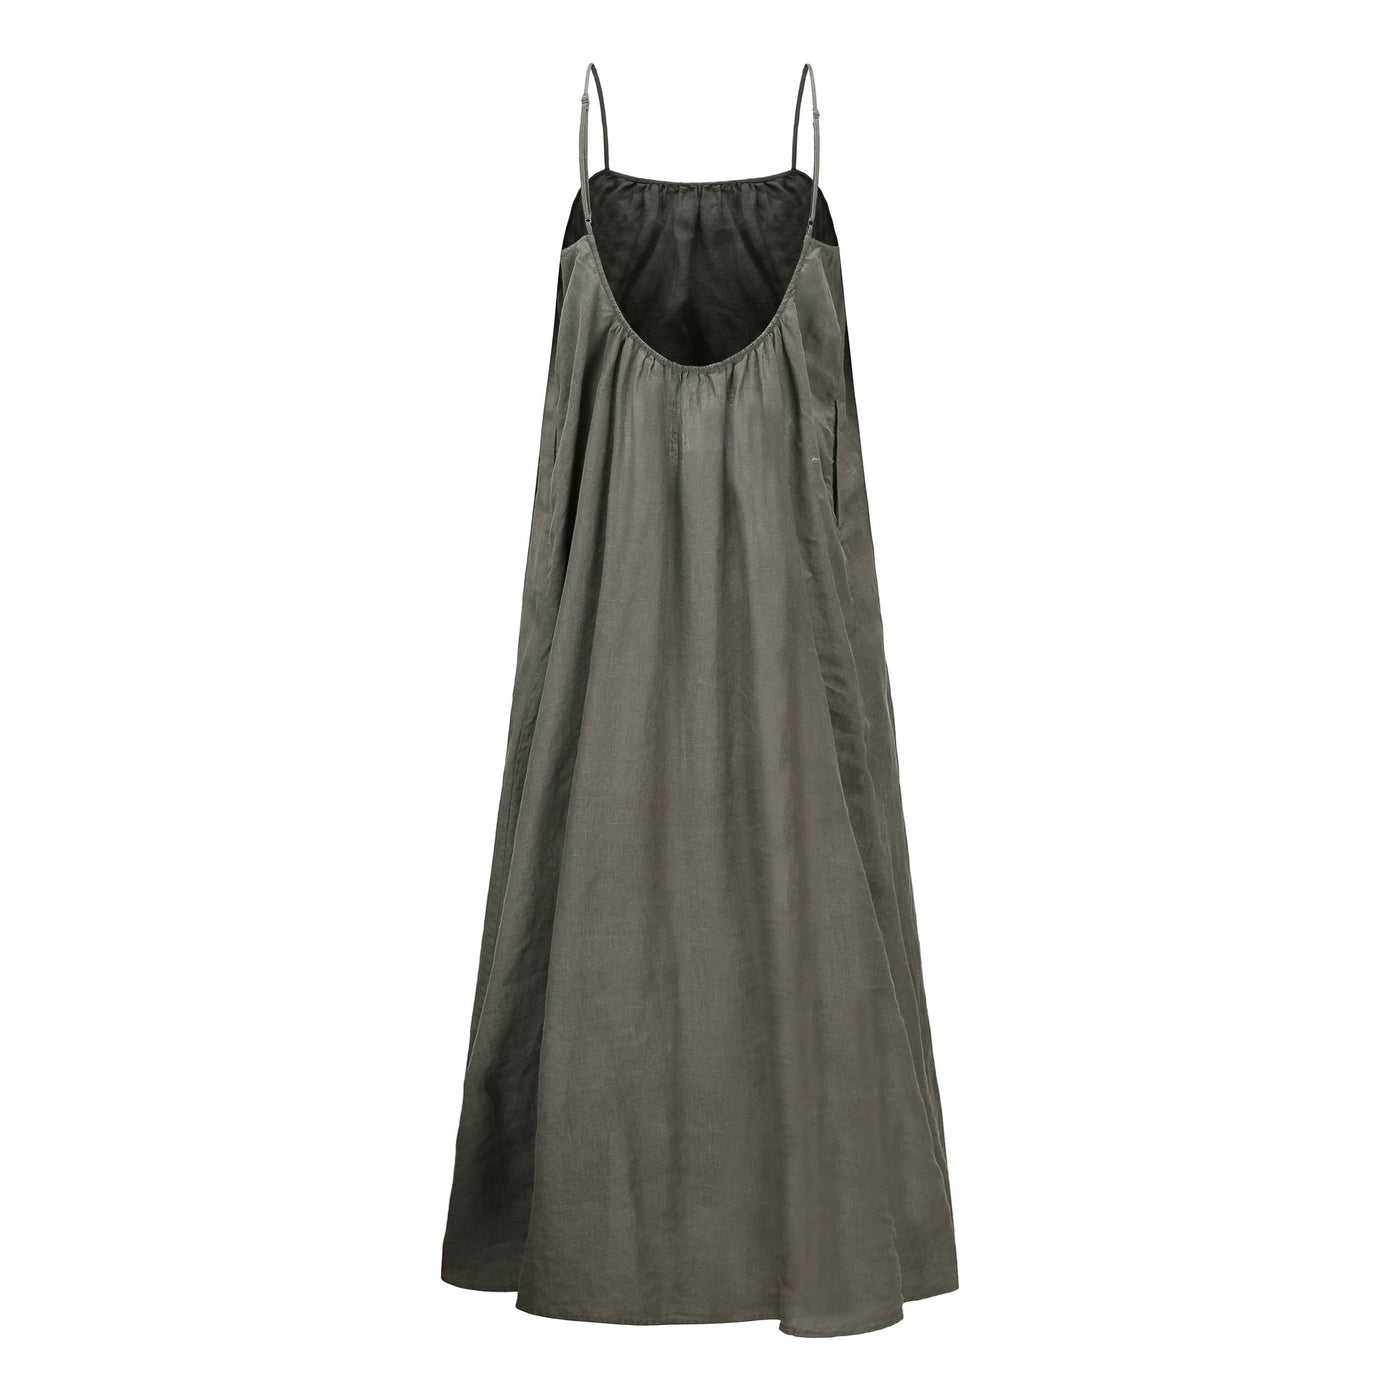 Lilly Pilly Collection 100% organic linen Olive Dress in Khaki as 3D image showing back view